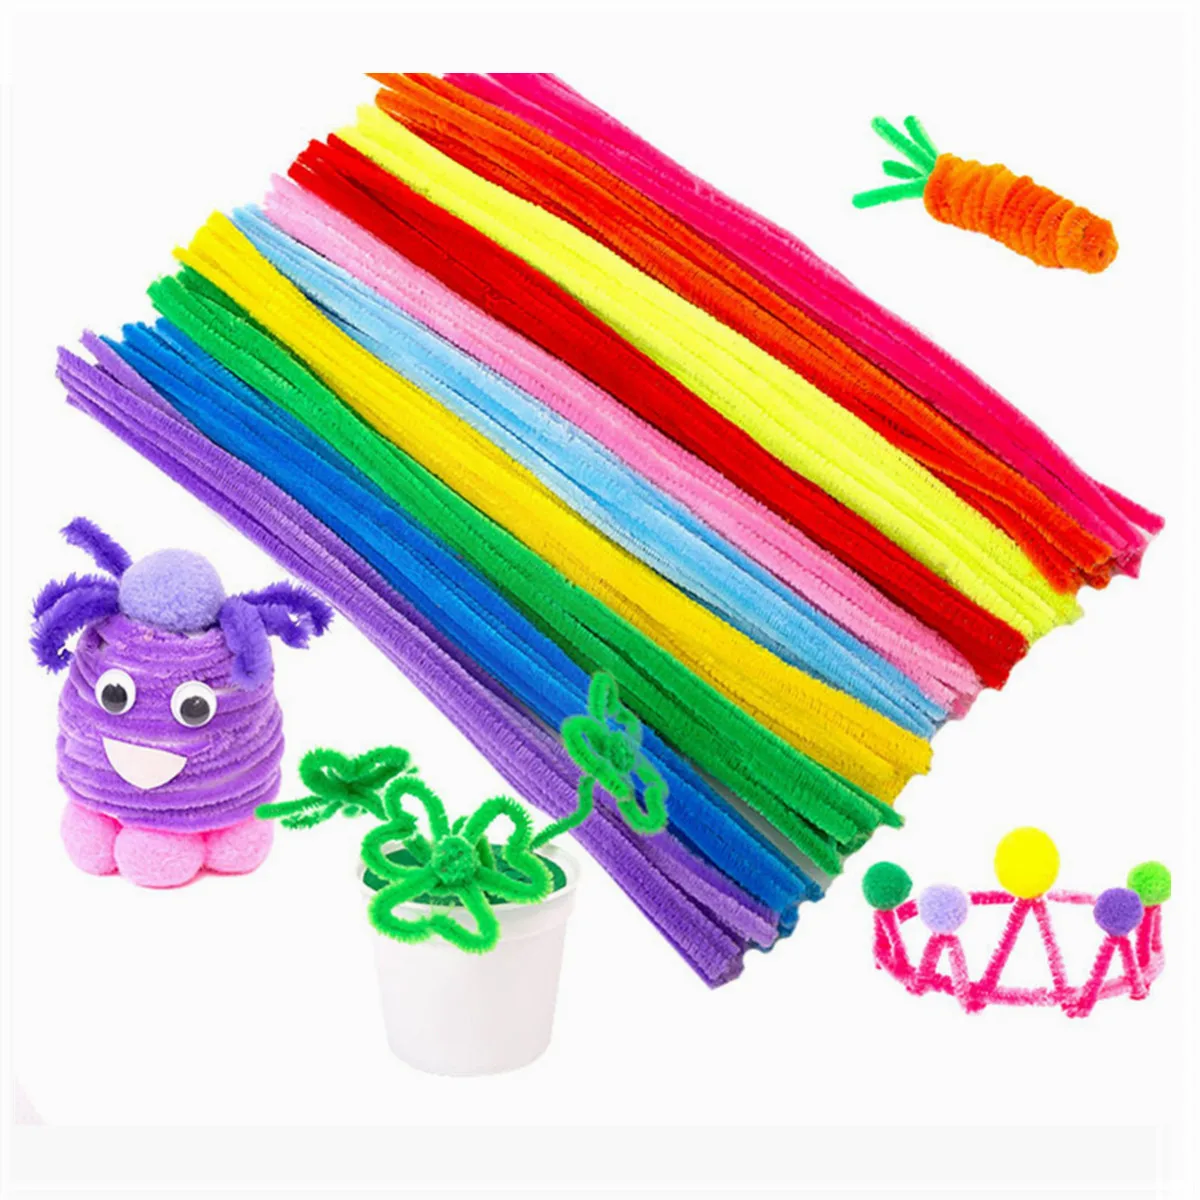 

500pcs Glitter Chenille Stems Pipe Cleaners Plush Tinsel Stems Wired Sticks Kids Educational DIY Craft Supplies Toys Crafting